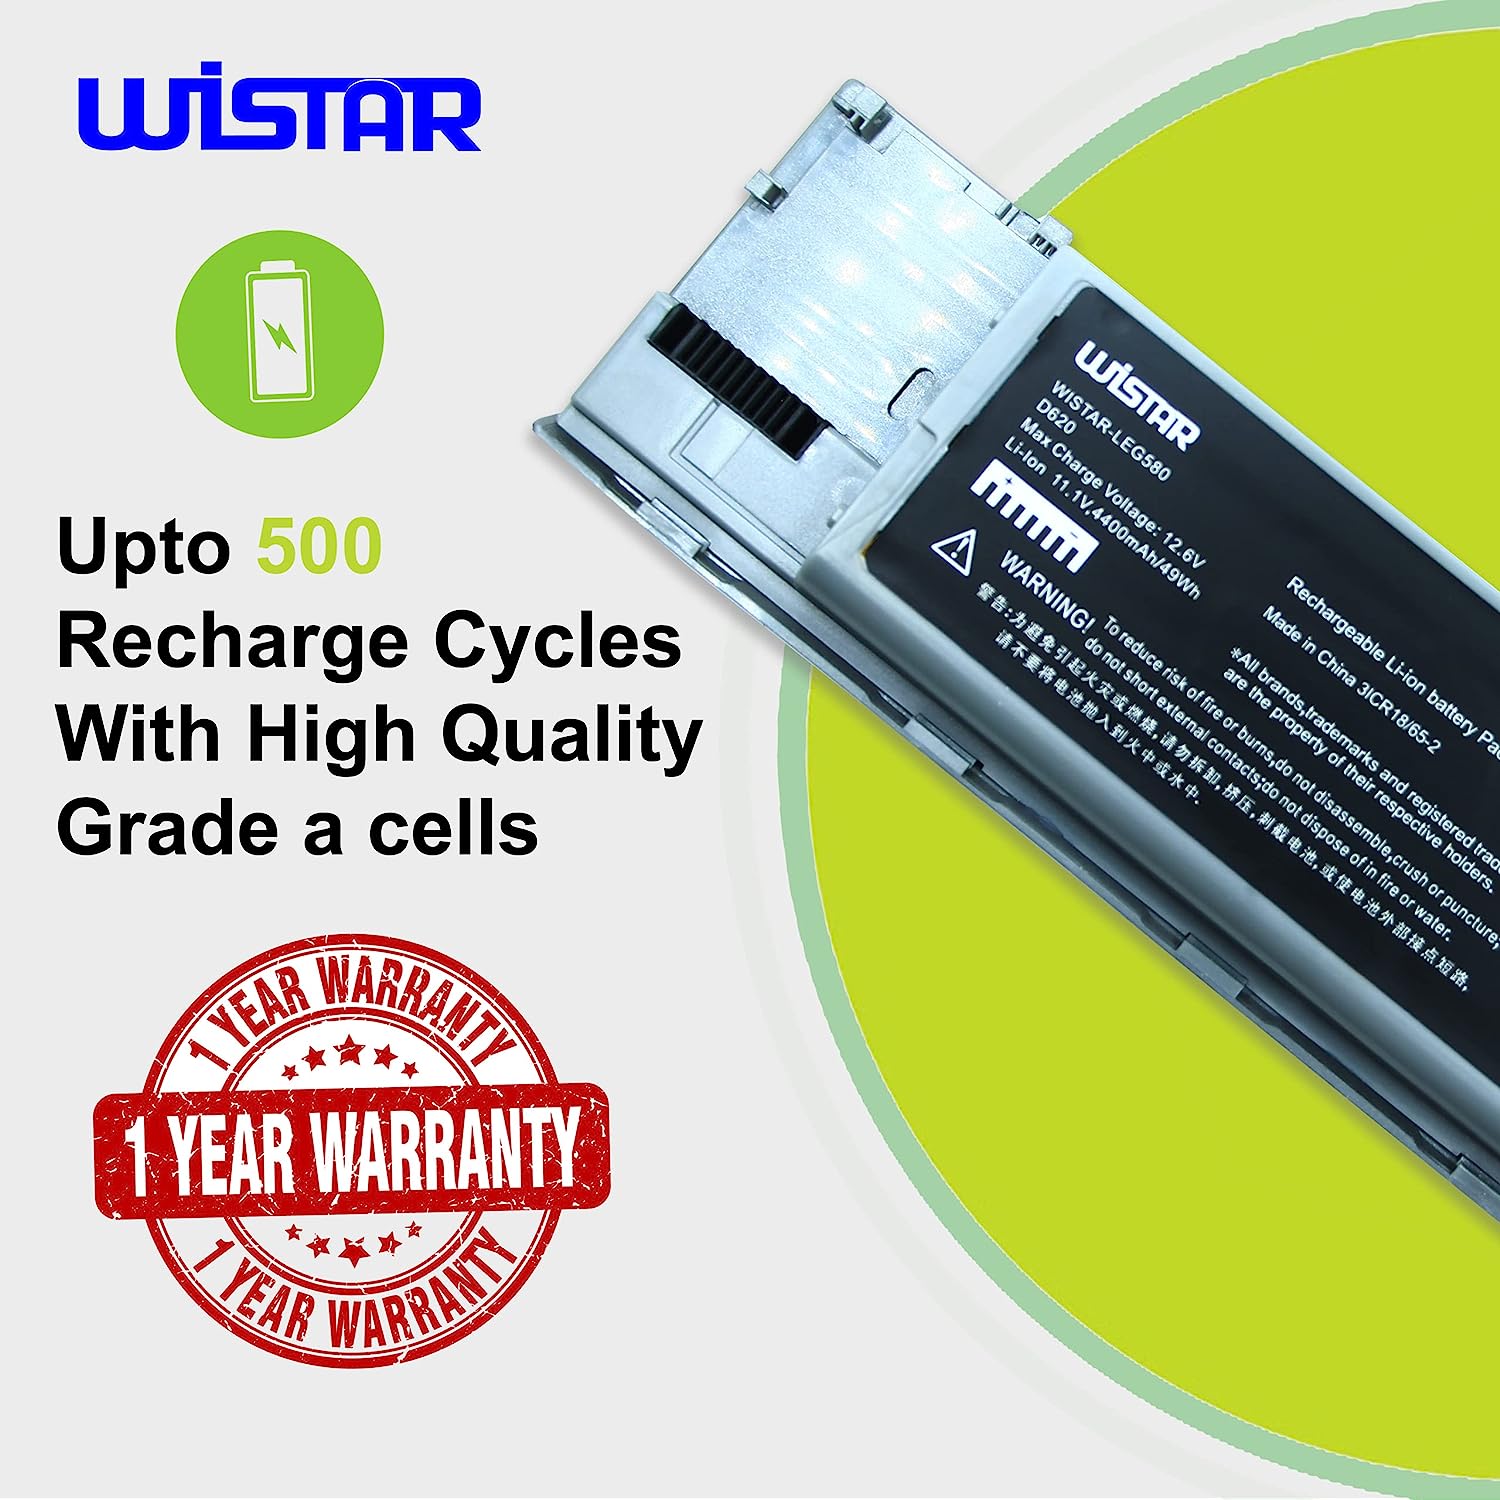 WISTAR Laptop Battery Compatible for Dell Latitude D620 D630 D630C D630N D631 D640 PC764, JD634, 312-0383, 451-10298  PP18L RD300 RD301 PC764 TC030 TD175